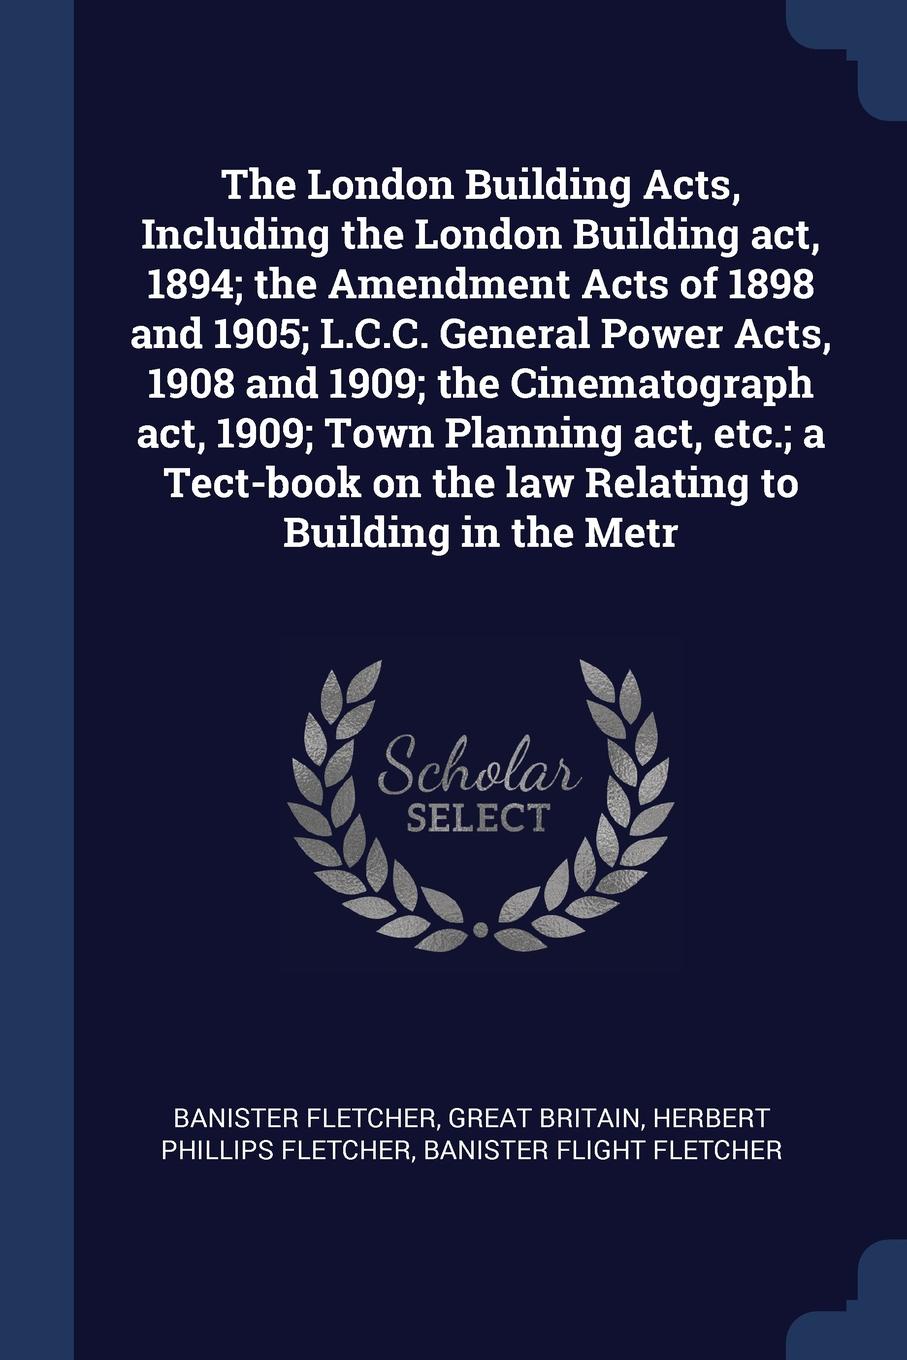 The London Building Acts, Including the London Building act, 1894; the Amendment Acts of 1898 and 1905; L.C.C. General Power Acts, 1908 and 1909; the Cinematograph act, 1909; Town Planning act, etc.; a Tect-book on the law Relating to Building in ...